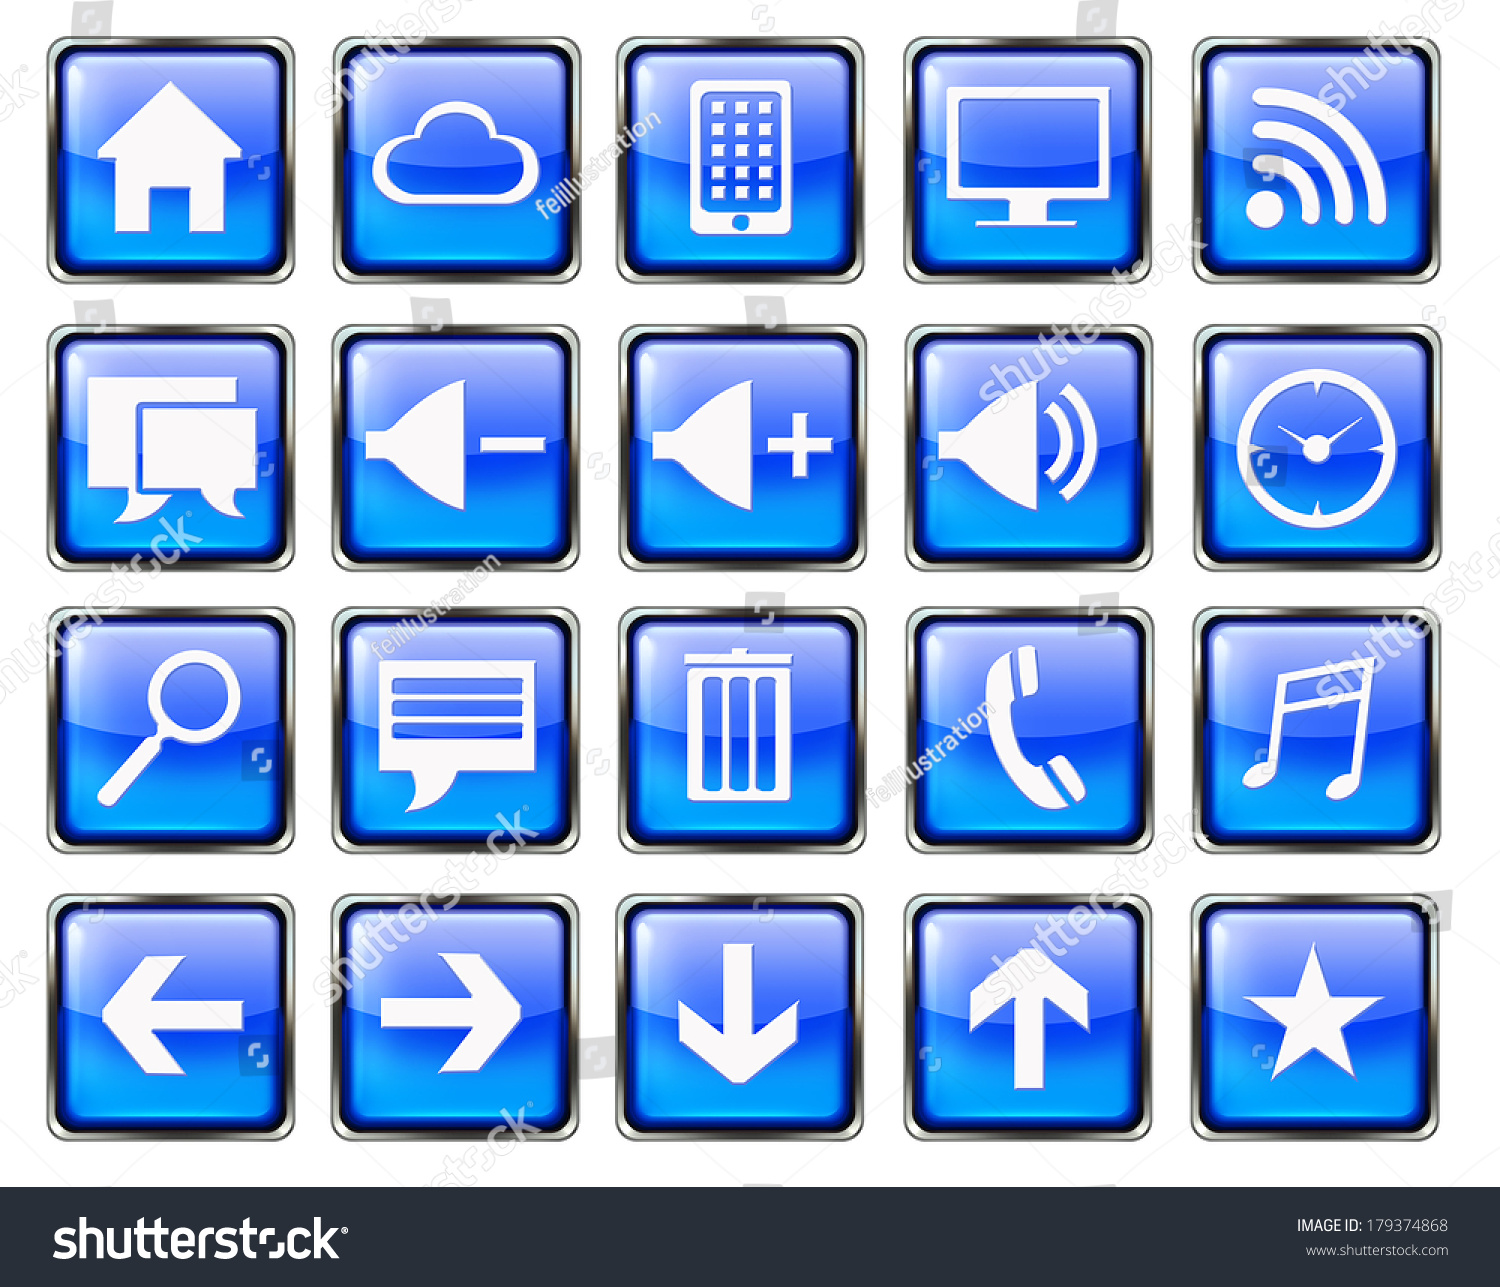 Blue Blank Square Phone Phone Icon Buttons Set Stock Photo 179374868 ...